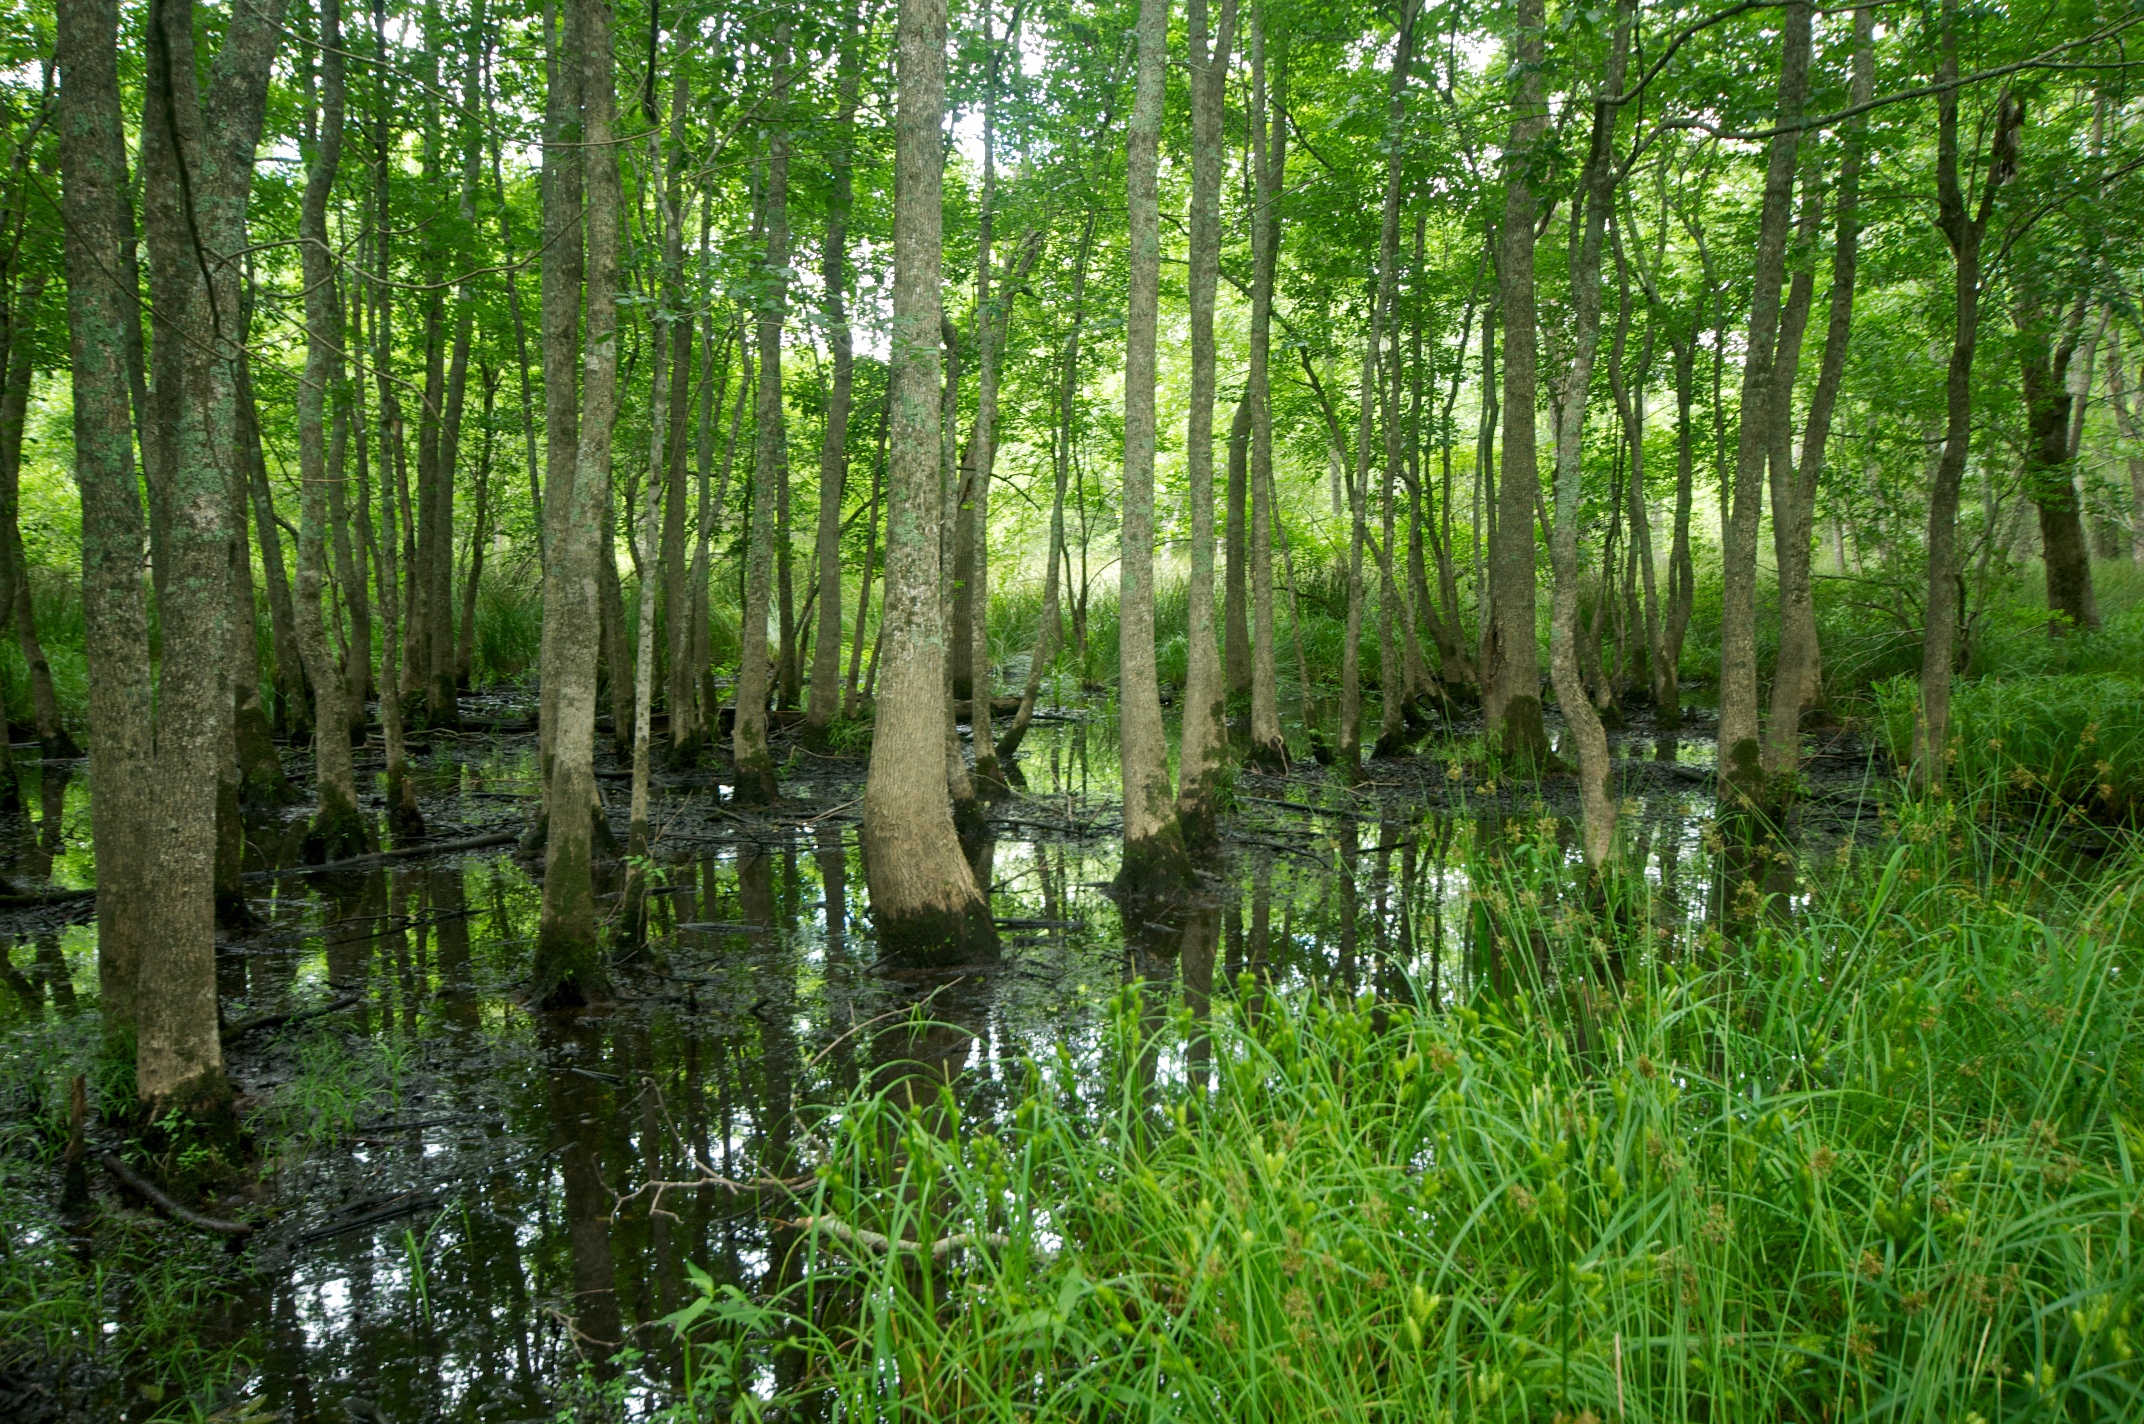 Trees of the bottomland hardwood forest.